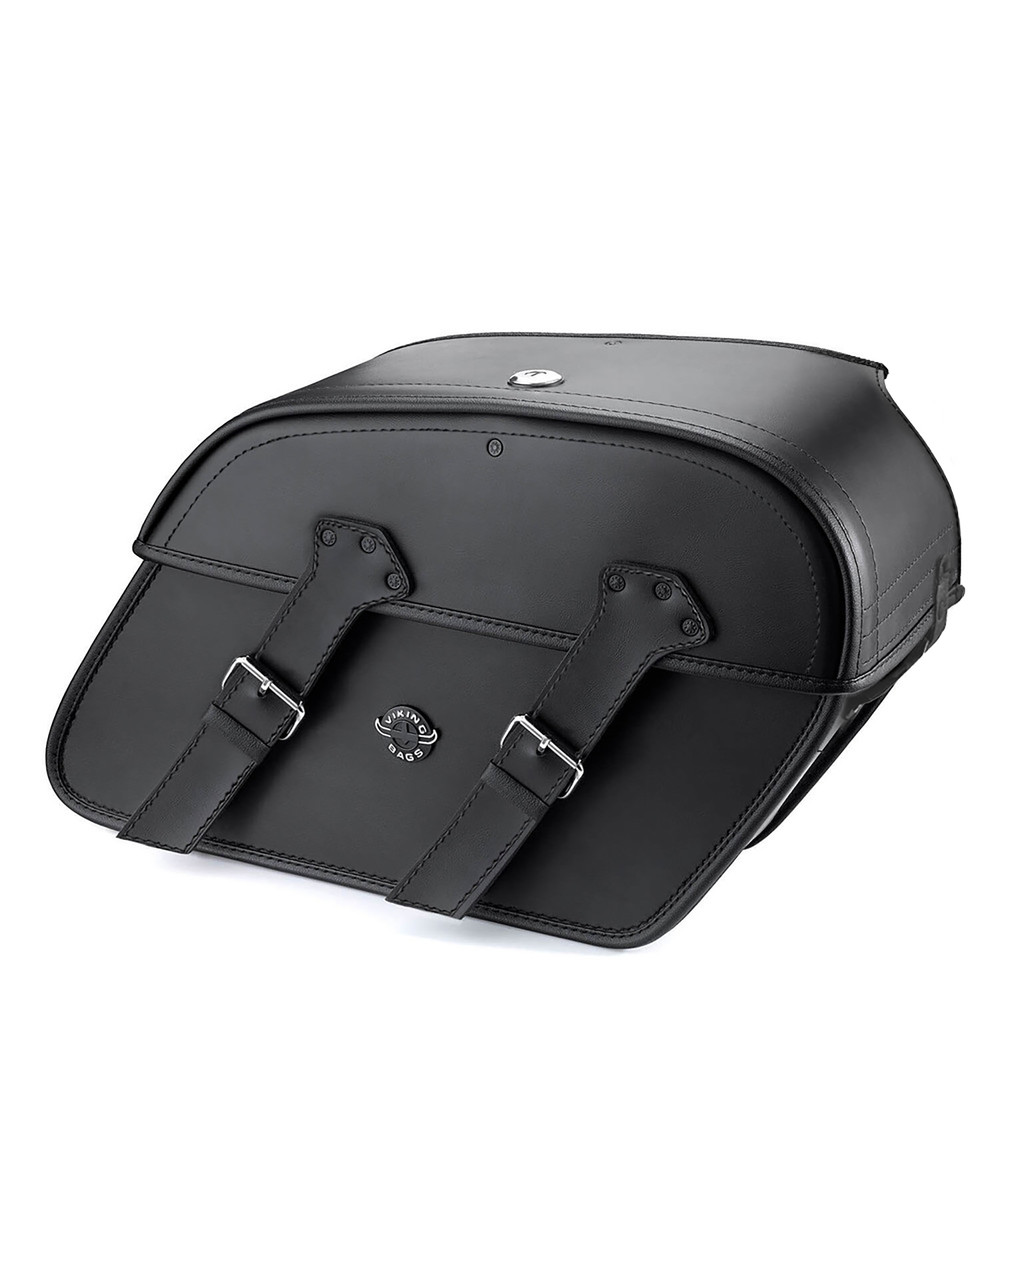 Viking Raven Extra Large Shock Cut-Out Leather Motorcycle Saddlebags for Harley Street 500